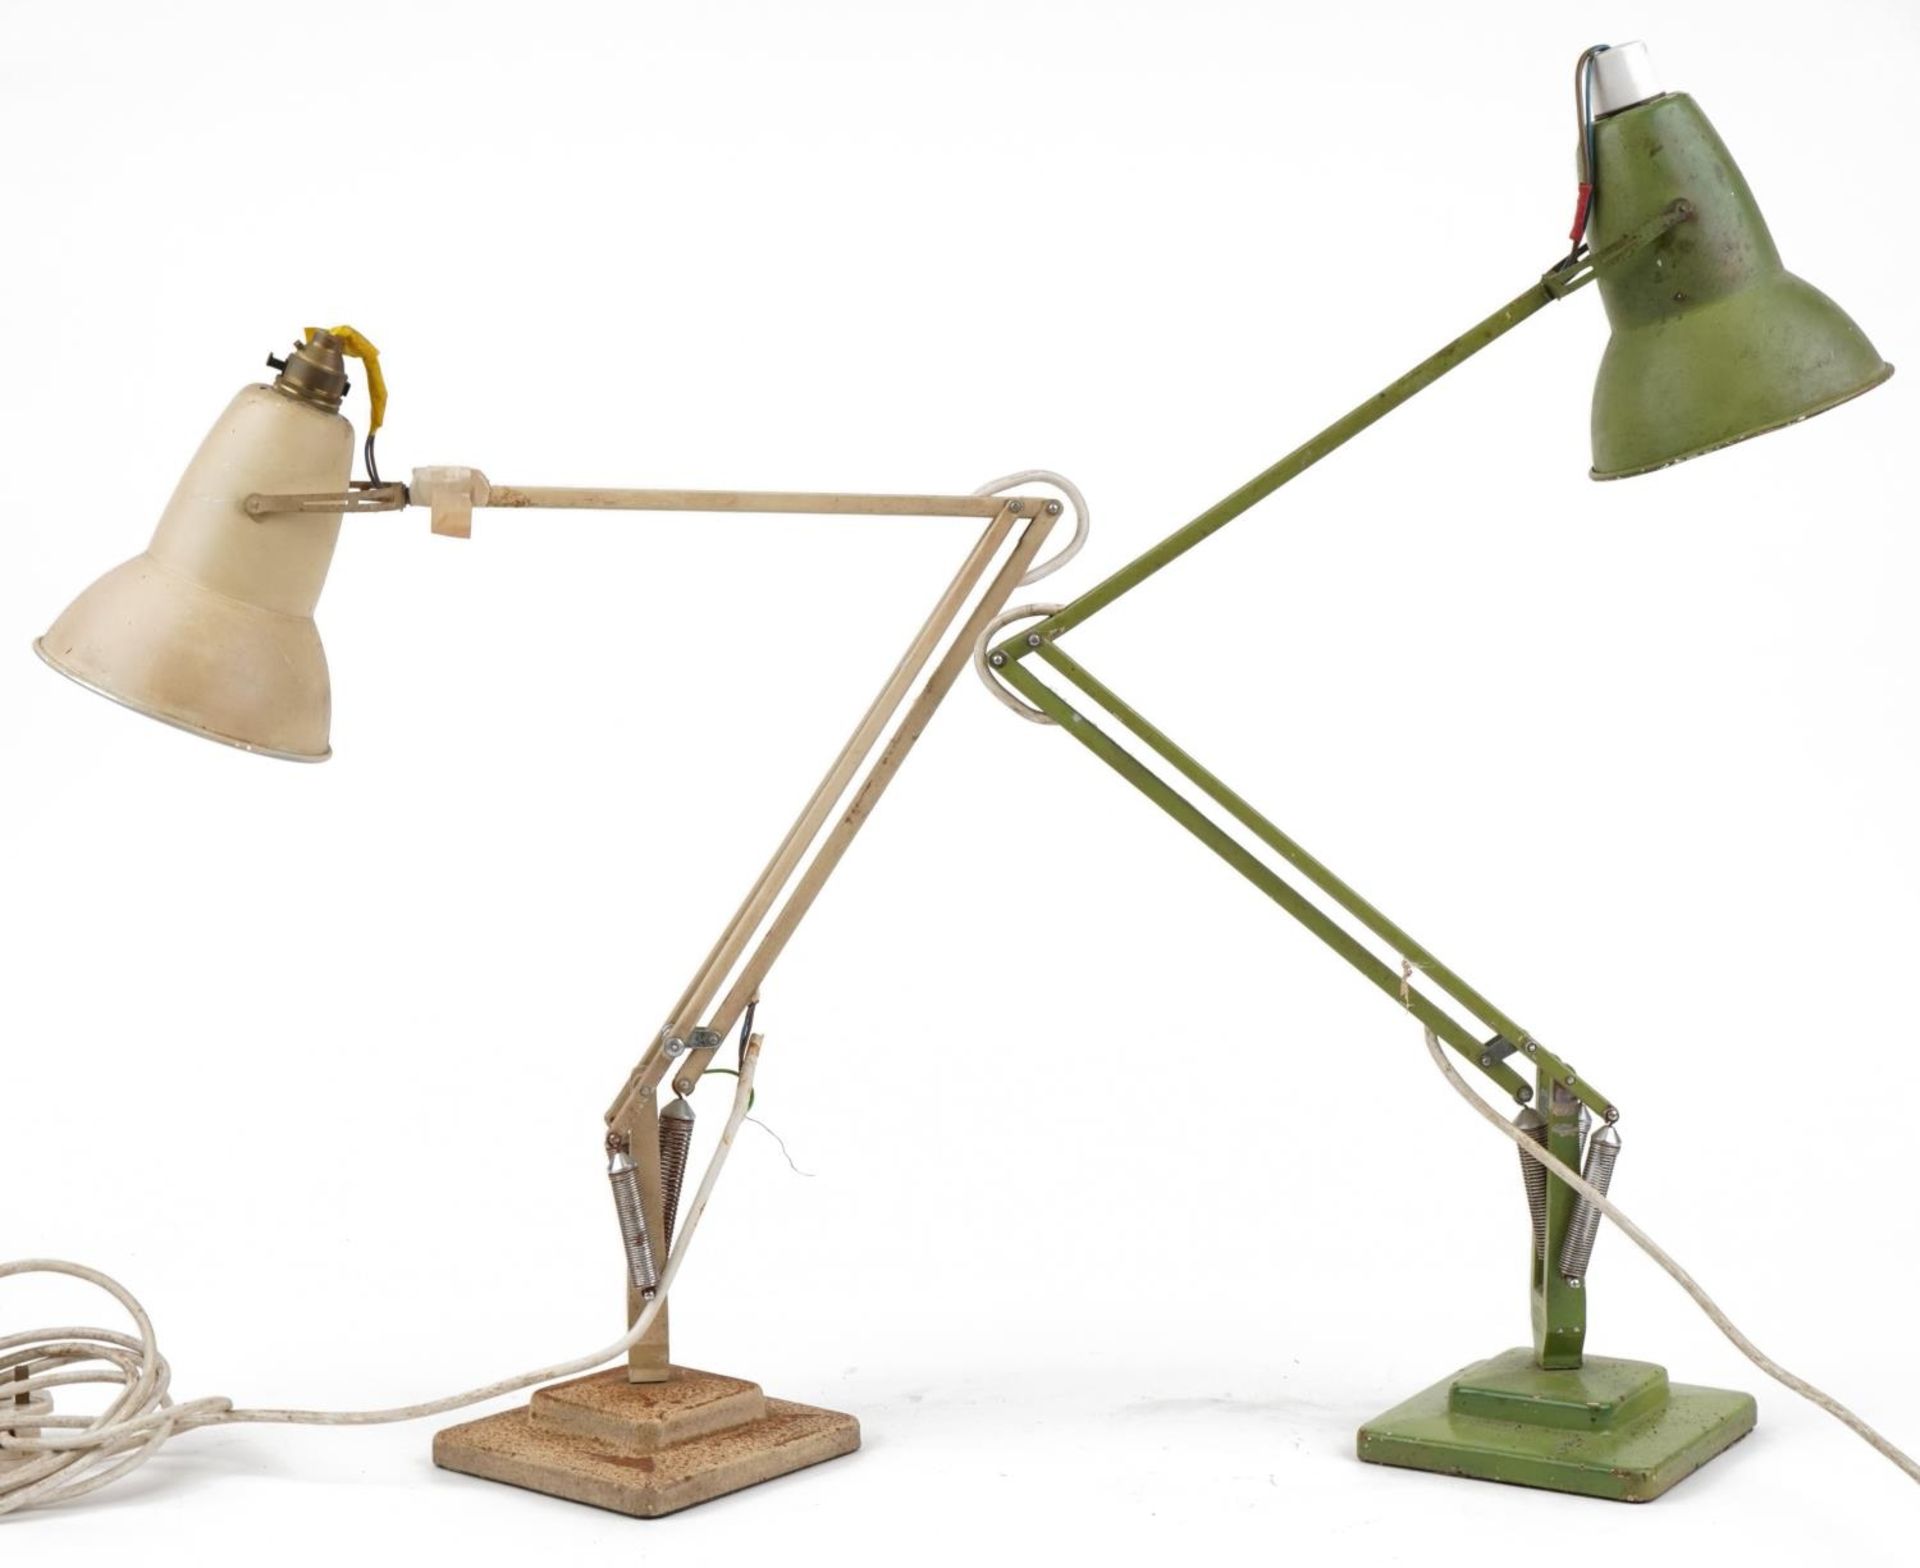 Two vintage Herbert Terry two step Anglepoise lamps : For further information on this lot please - Image 3 of 4